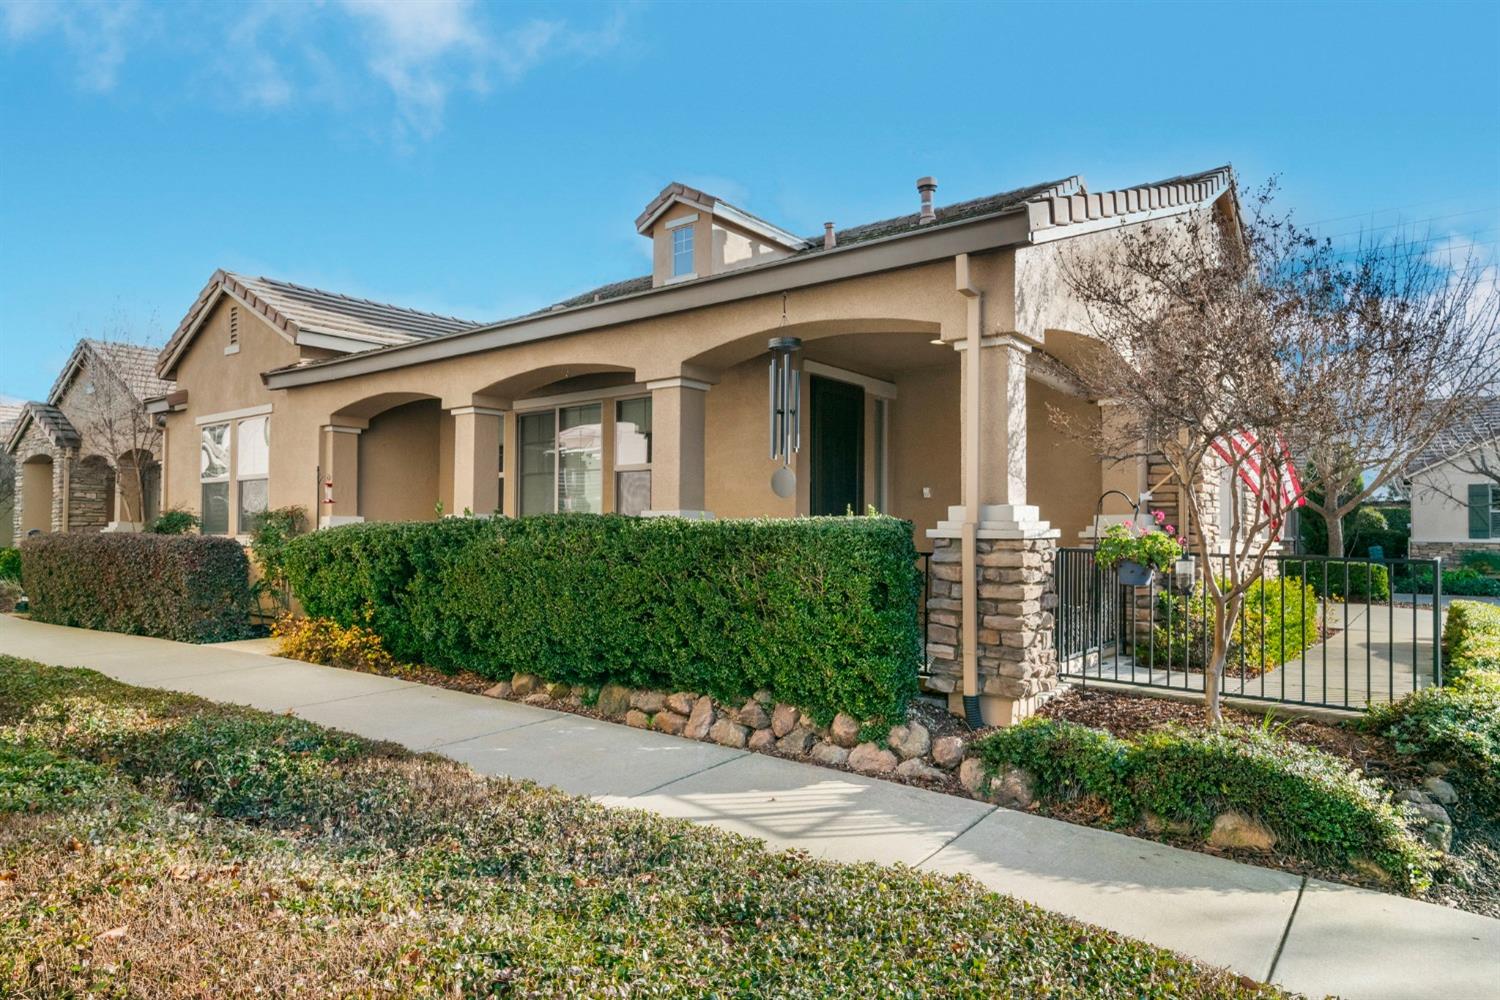 Photo of 1217 Marseille Ln in Roseville, CA